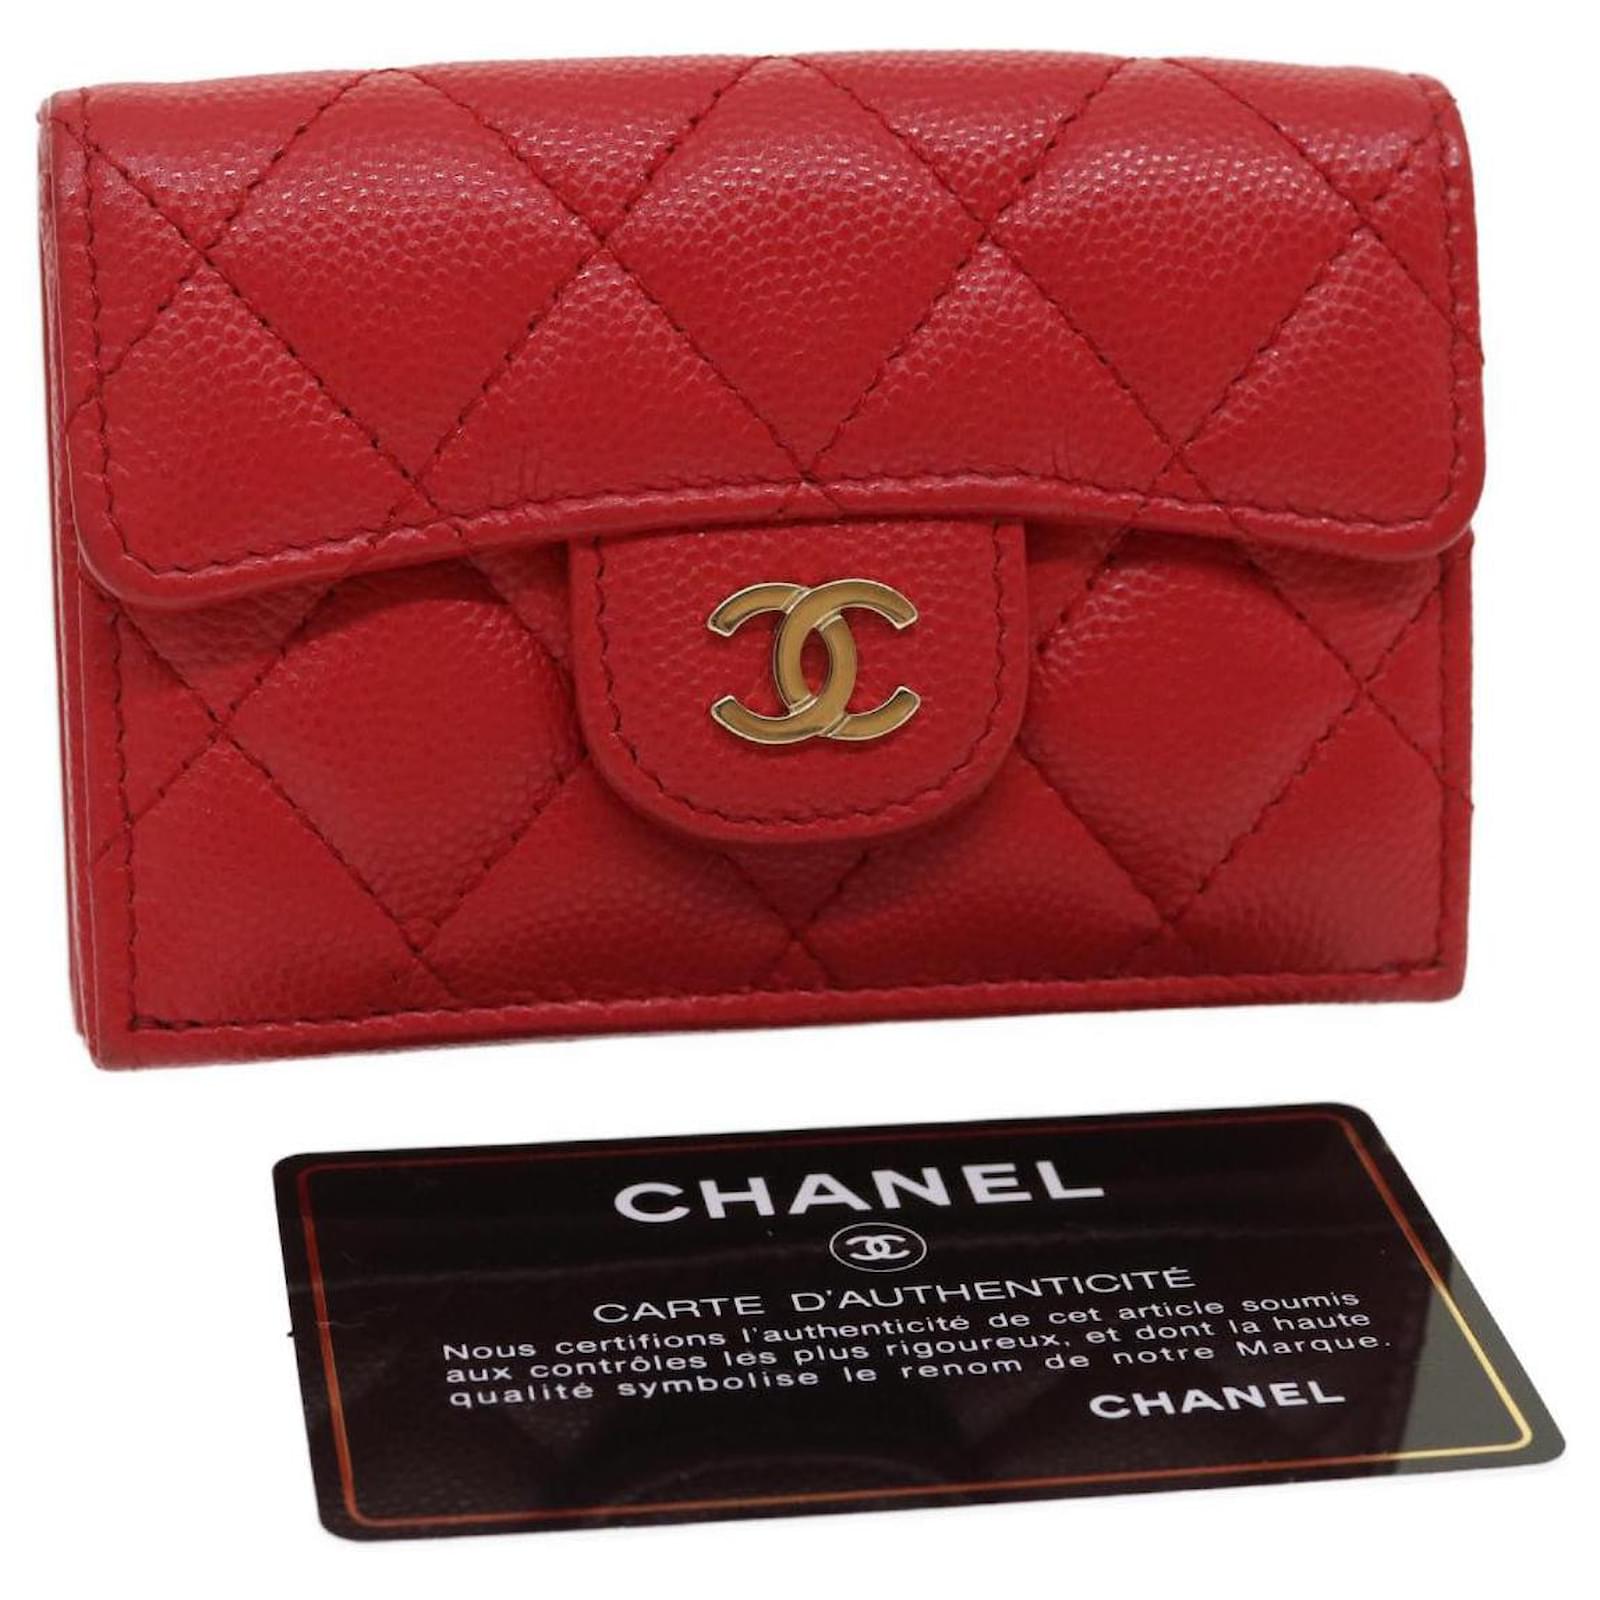 Purses, Wallets, Cases Chanel Chanel Caviar Skin Matelasse Small Flap Wallet Leather Red CC Auth Ai650a